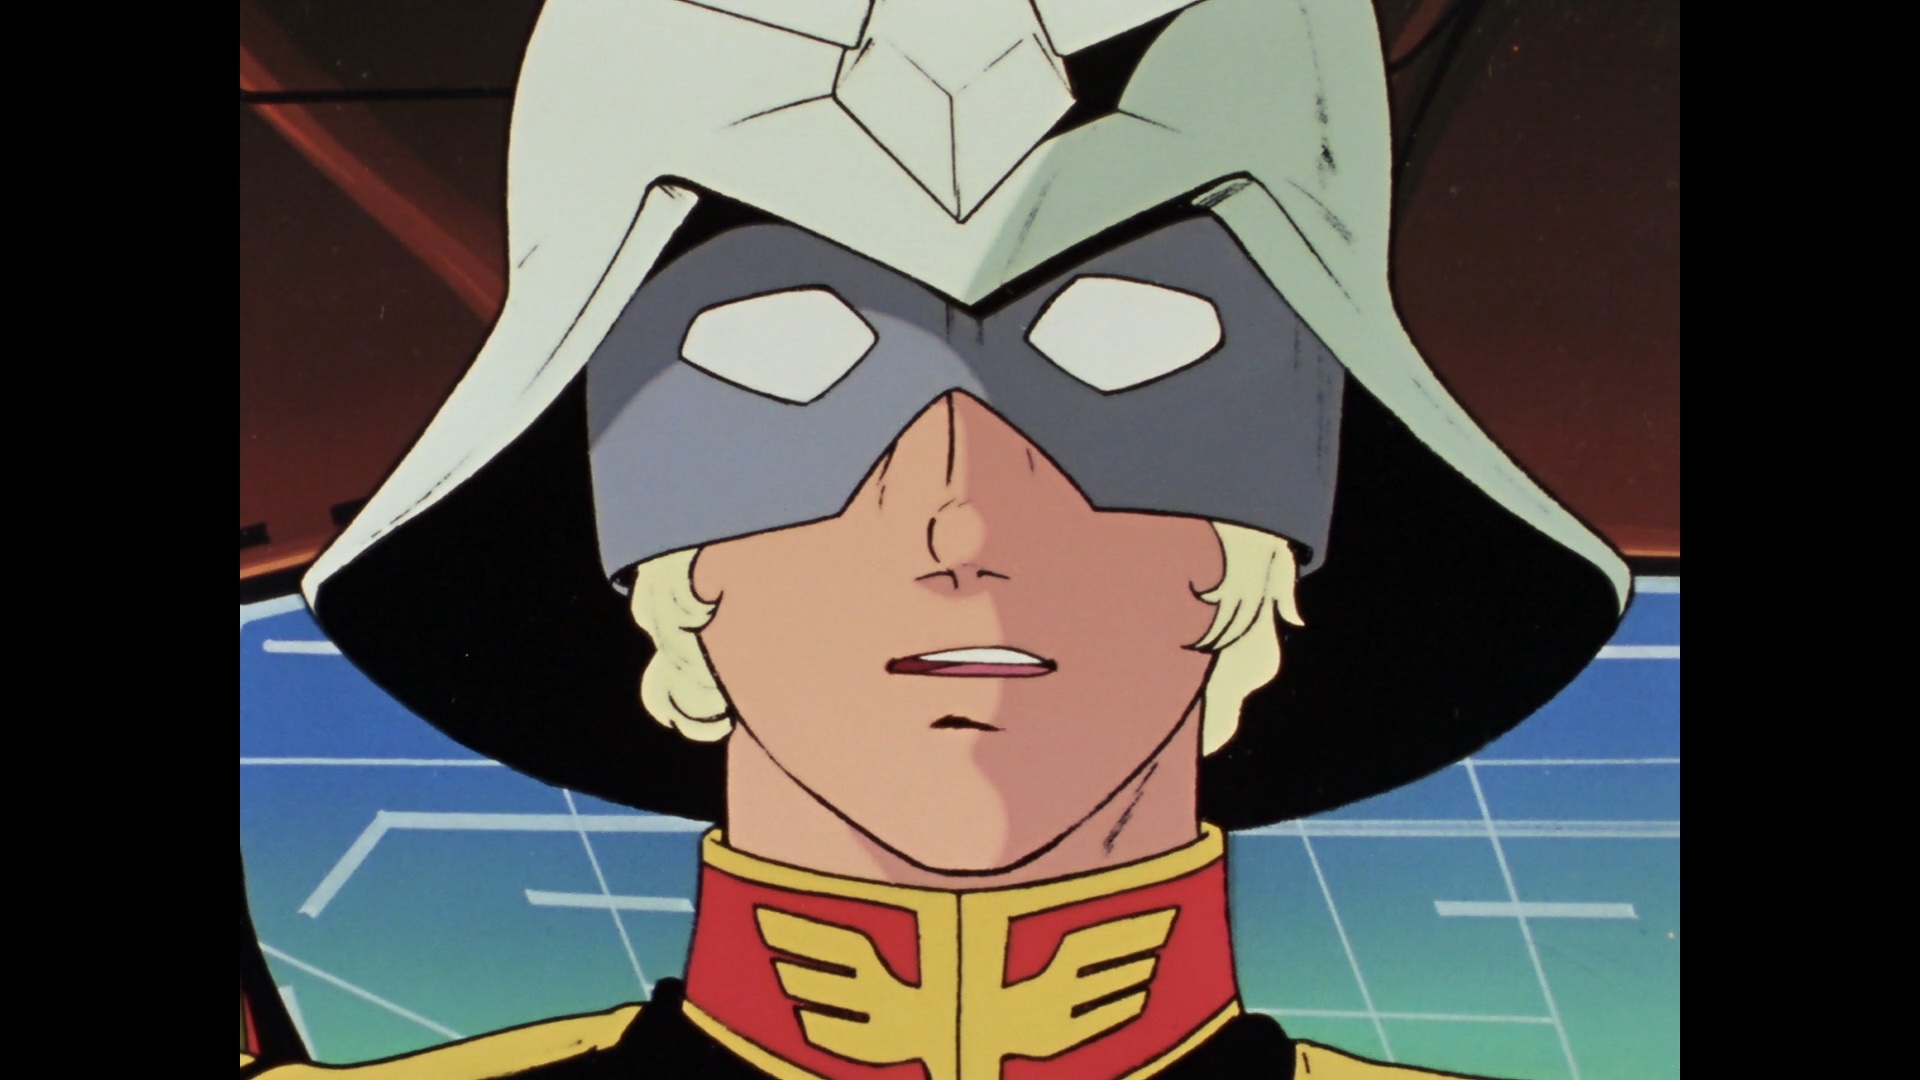 Char Aznable doesn't wish to contemplate the follies of youth in a scene from the Mobile Suit Gundam TV anime.